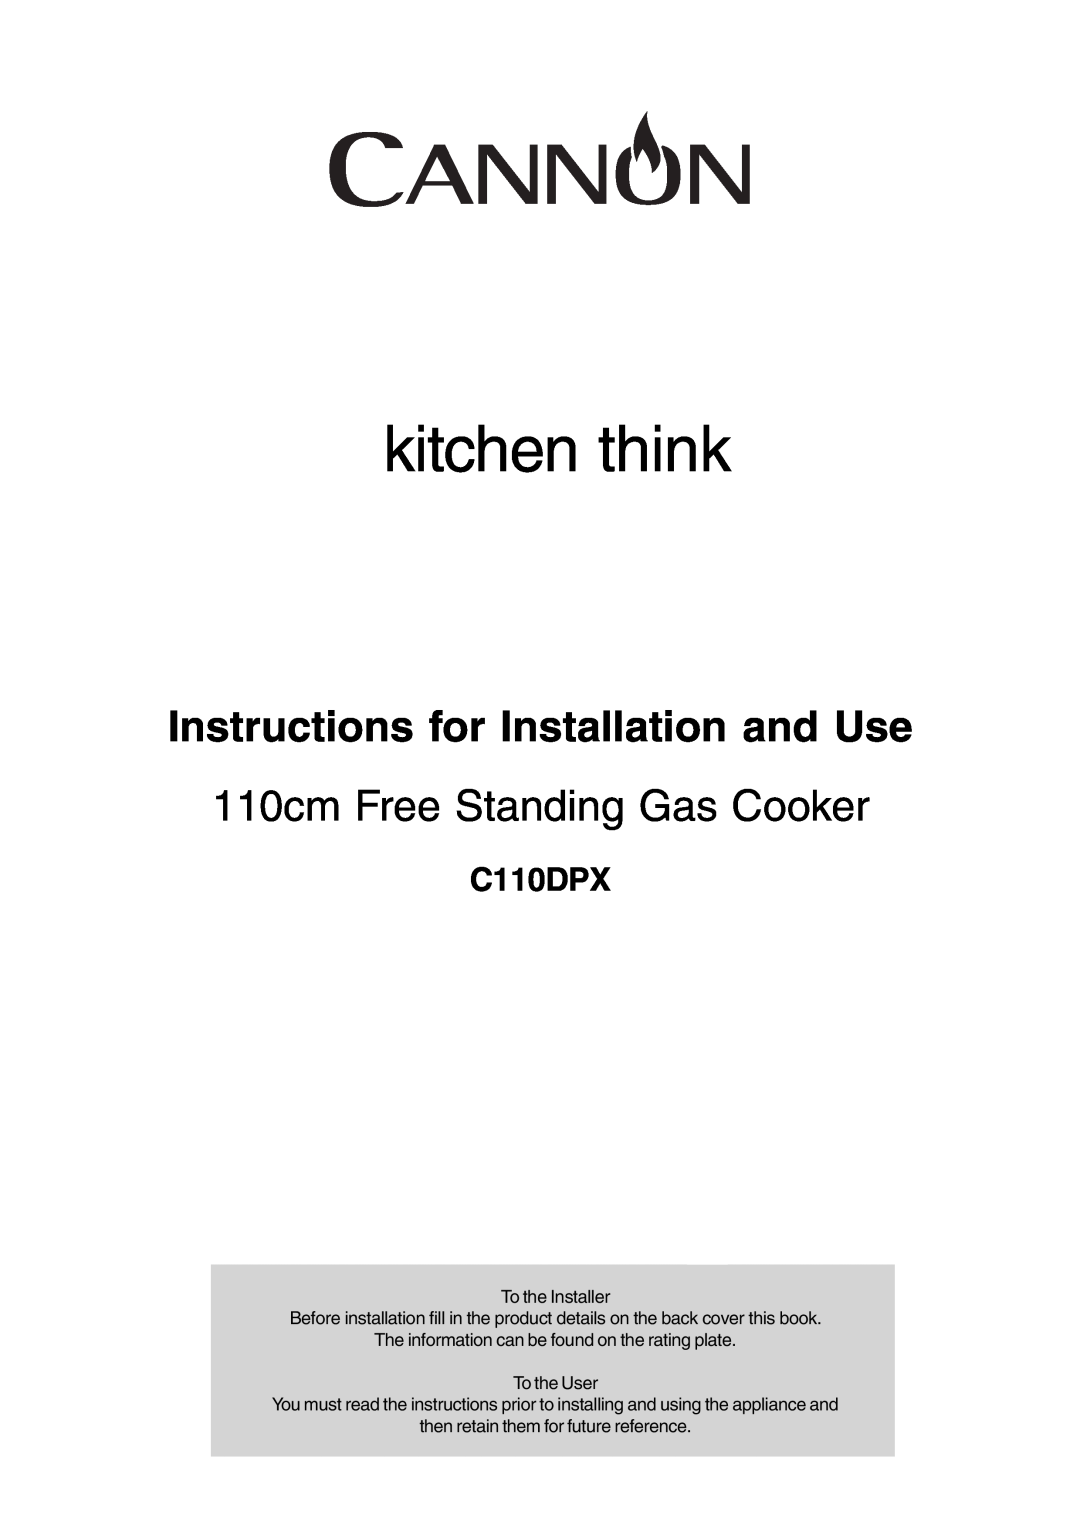 Cannon C110DPX manual kitchen think, Instructions for Installation and Use, 110cm Free Standing Gas Cooker 